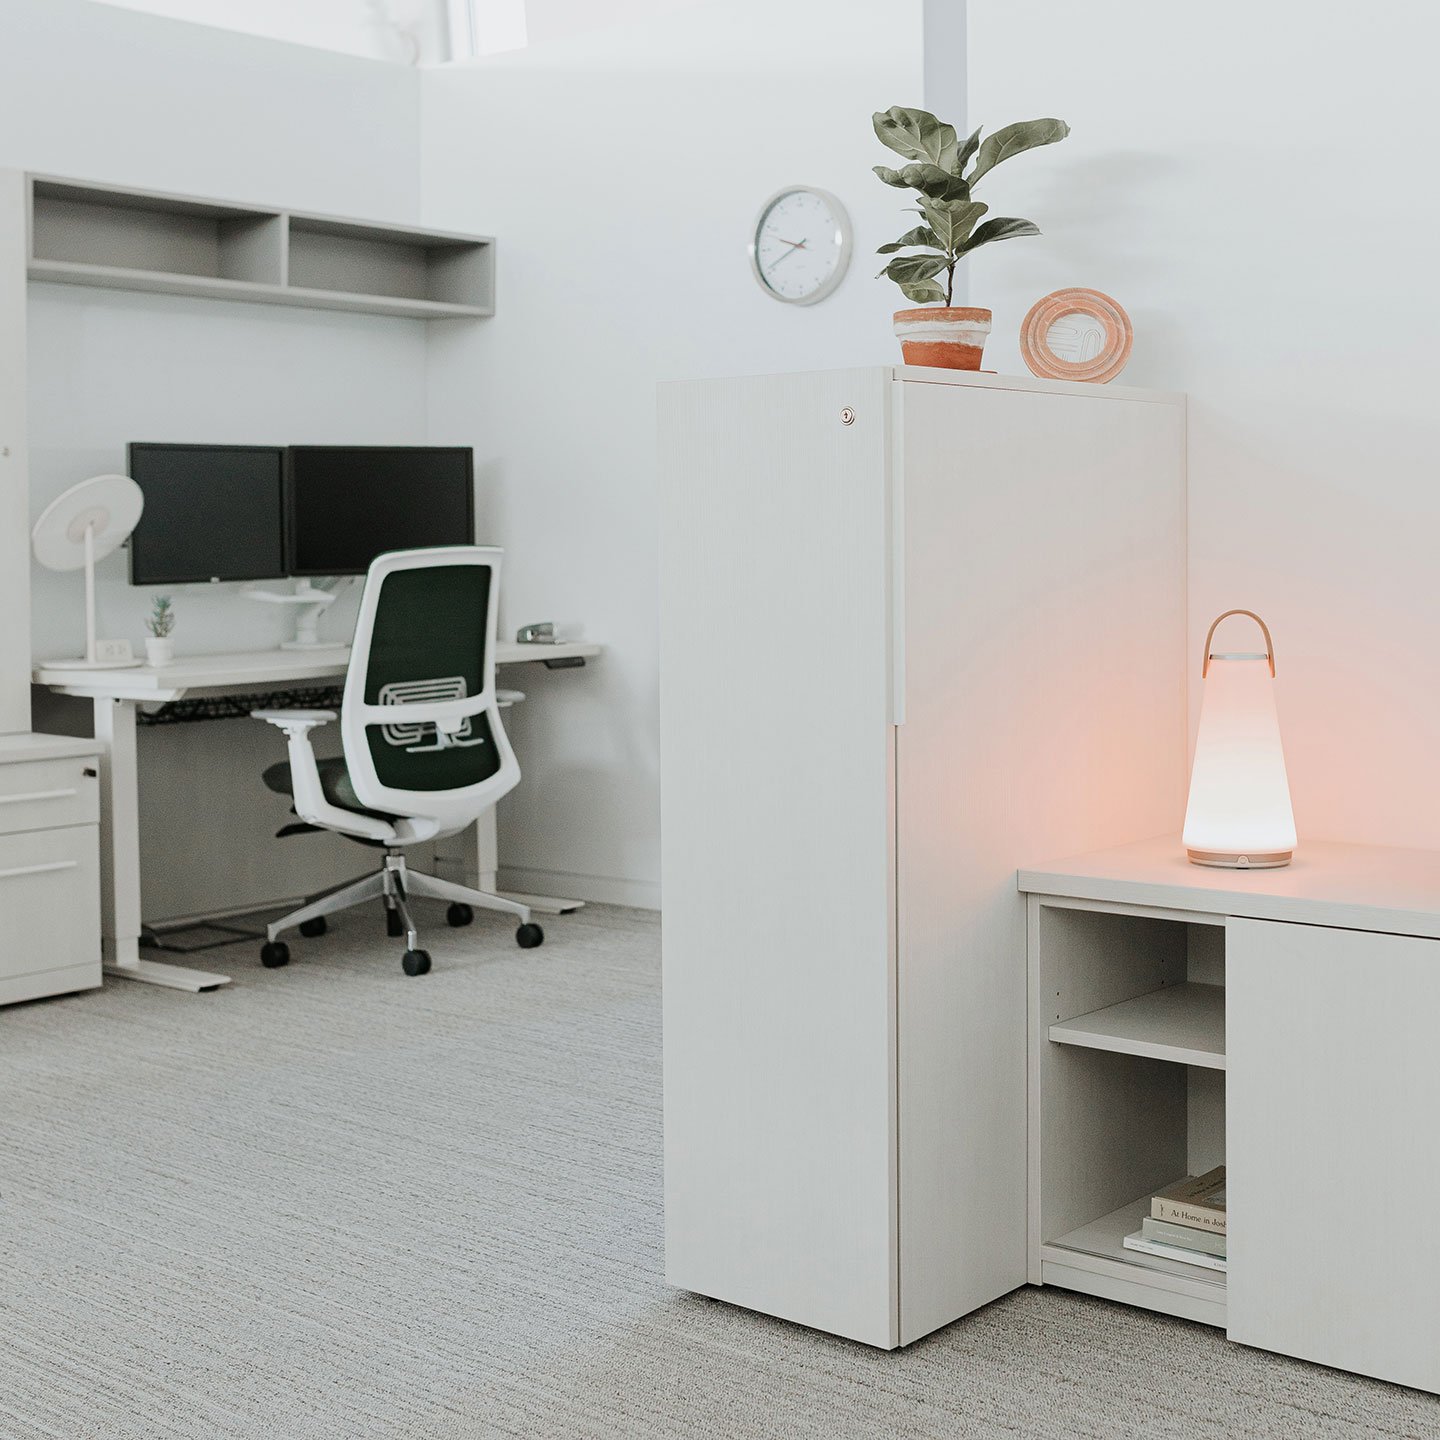 Haworth Uma Lighting in office space with white storage 